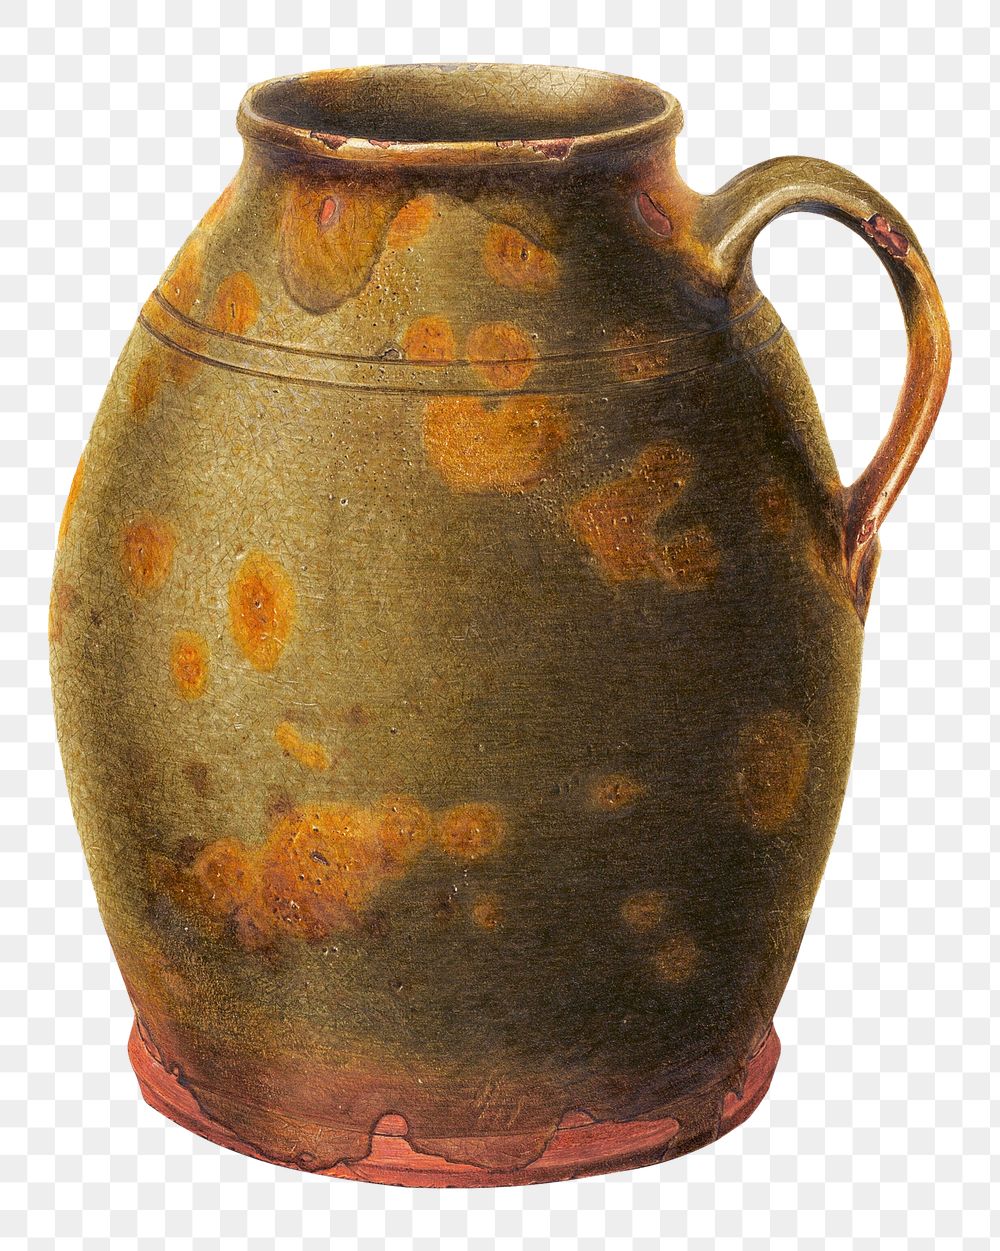 Vintage jug png illustration, remixed from the artwork by Alfred Parys